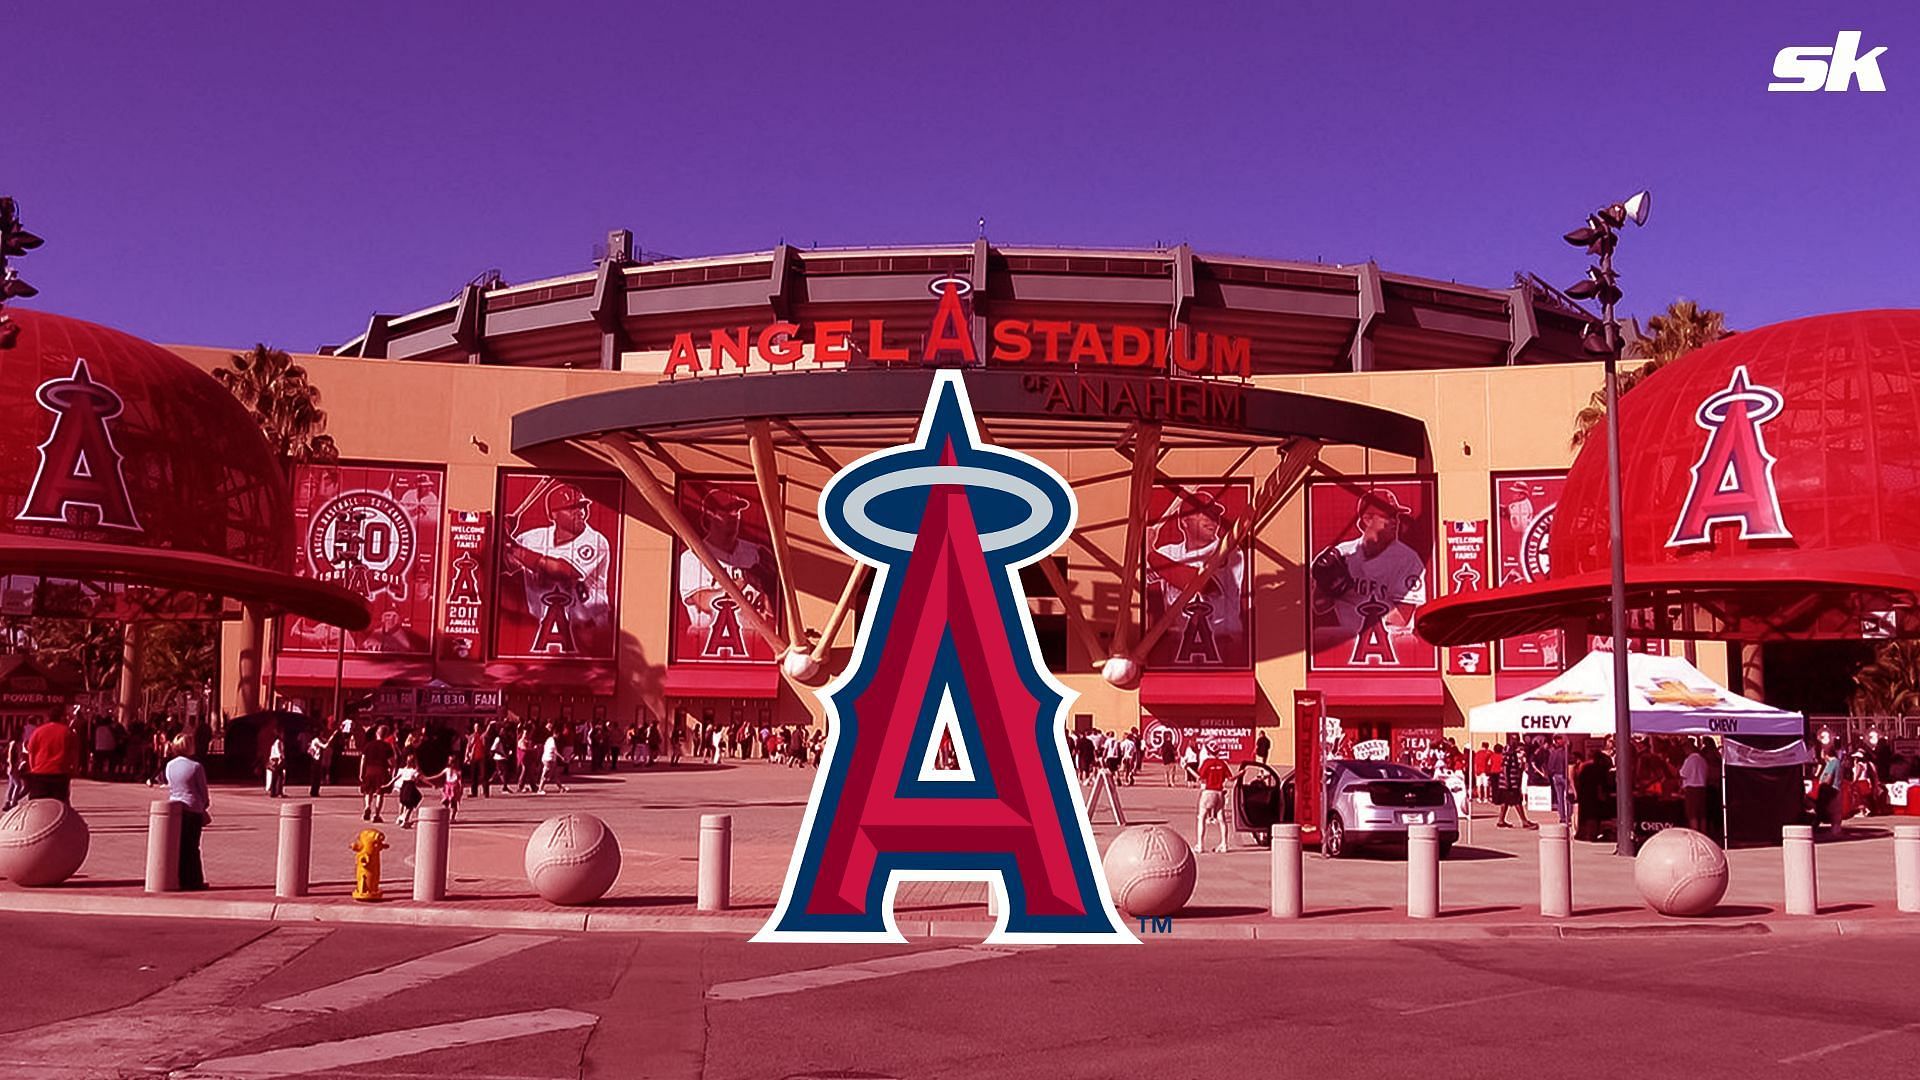 Angel Stadium has served as the home of the Los Angeles Angels since 1966